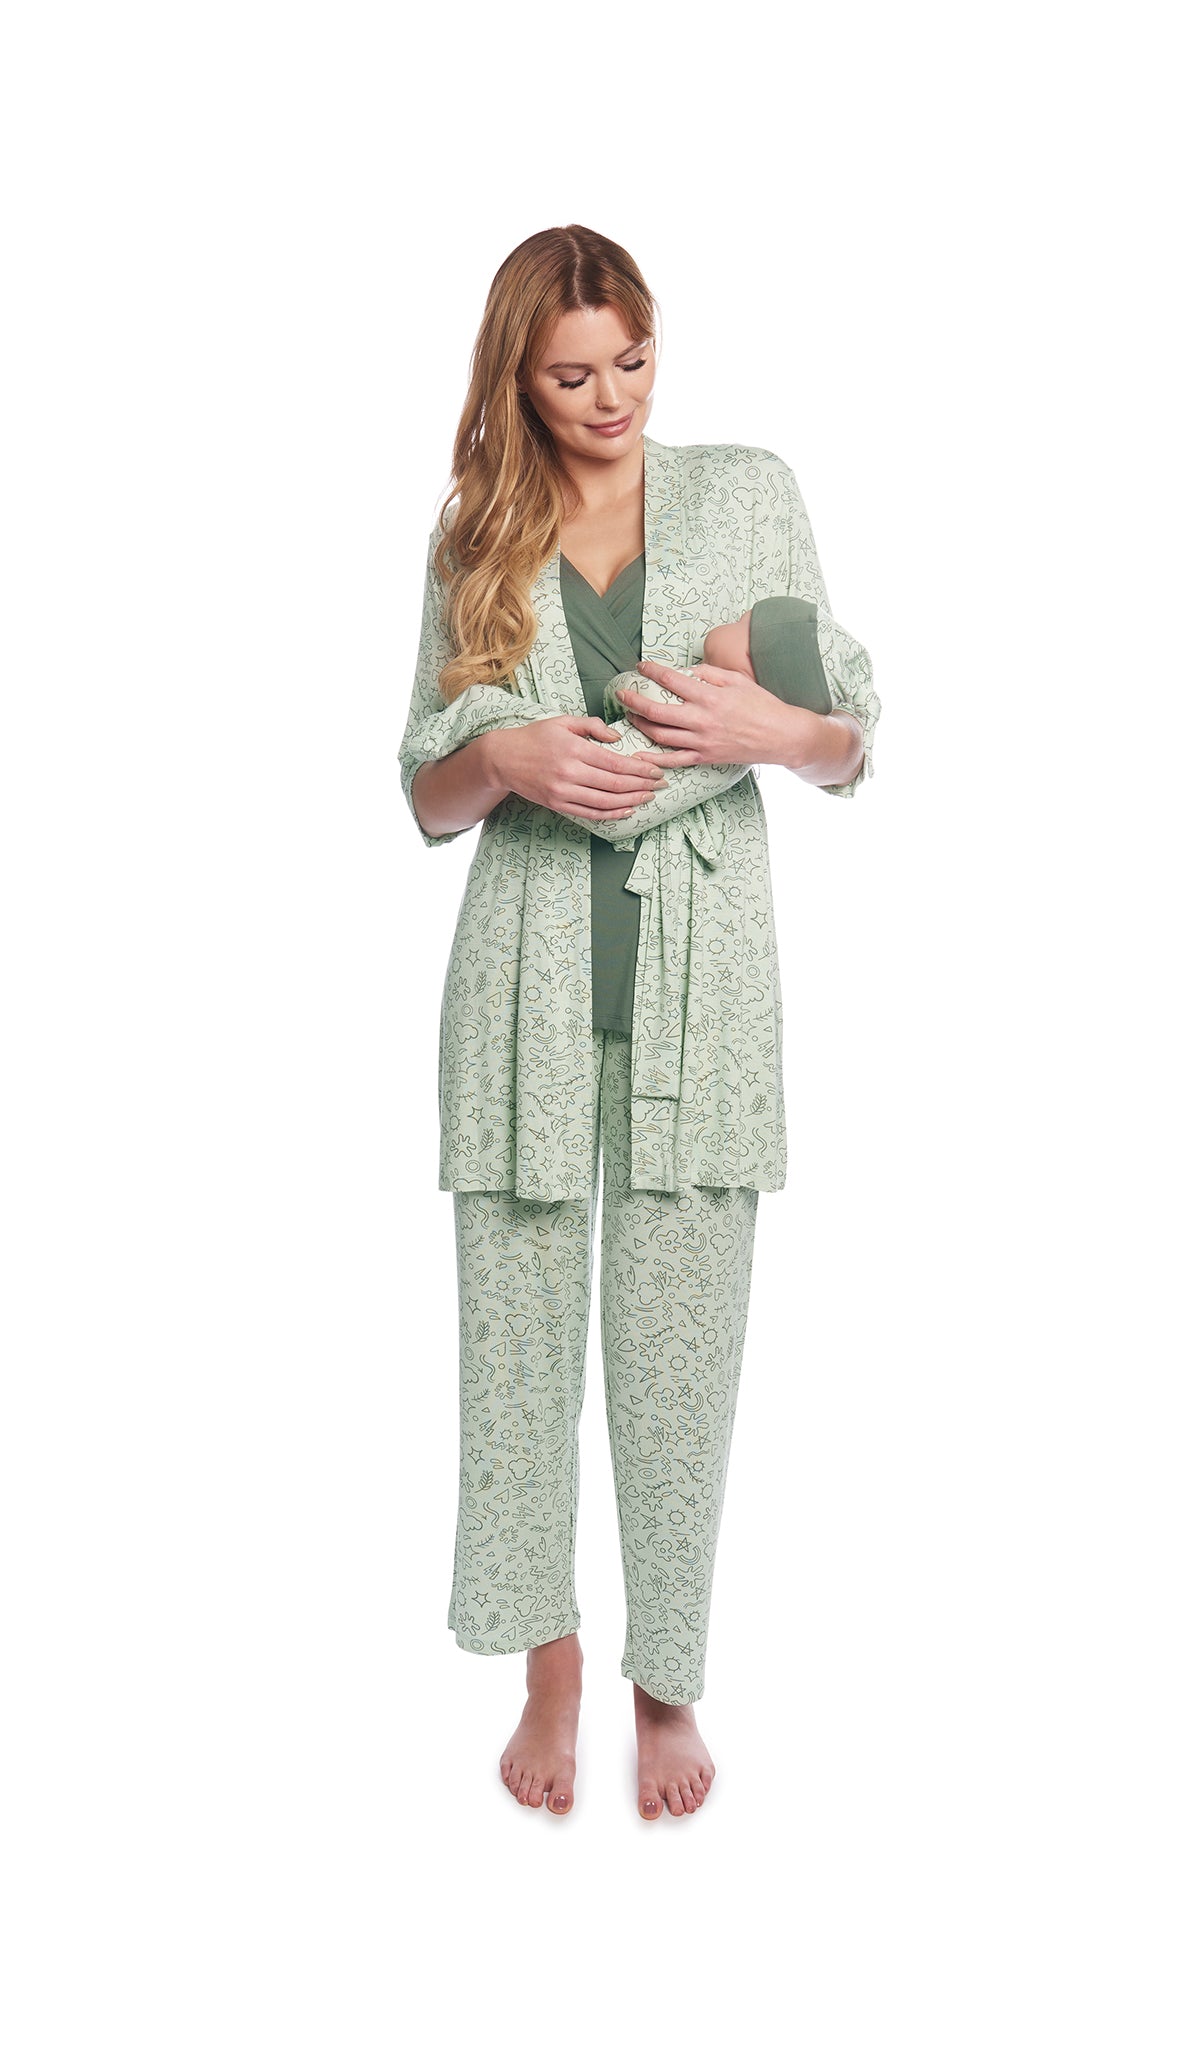 Sage Doodle Analise 5-Piece Set. Woman wearing 3/4 sleeve robe, tank top and pant while holding a baby wearing baby gown and knotted baby hat.